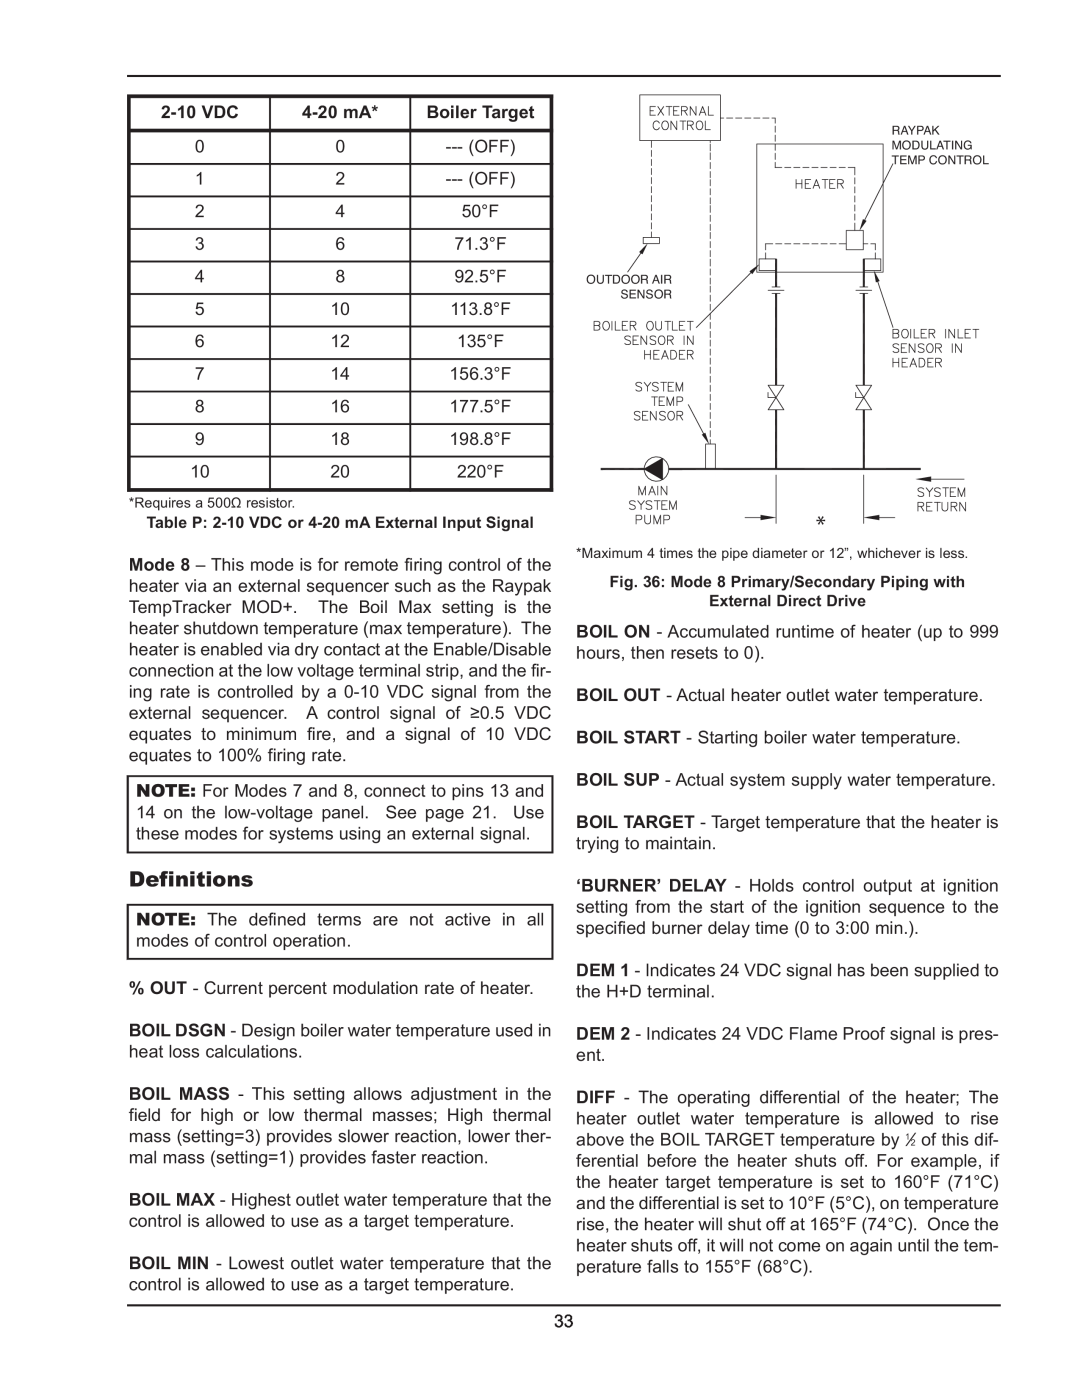 Raypak 5042004 operating instructions Definitions, 2-10VDC, 4-20mA 